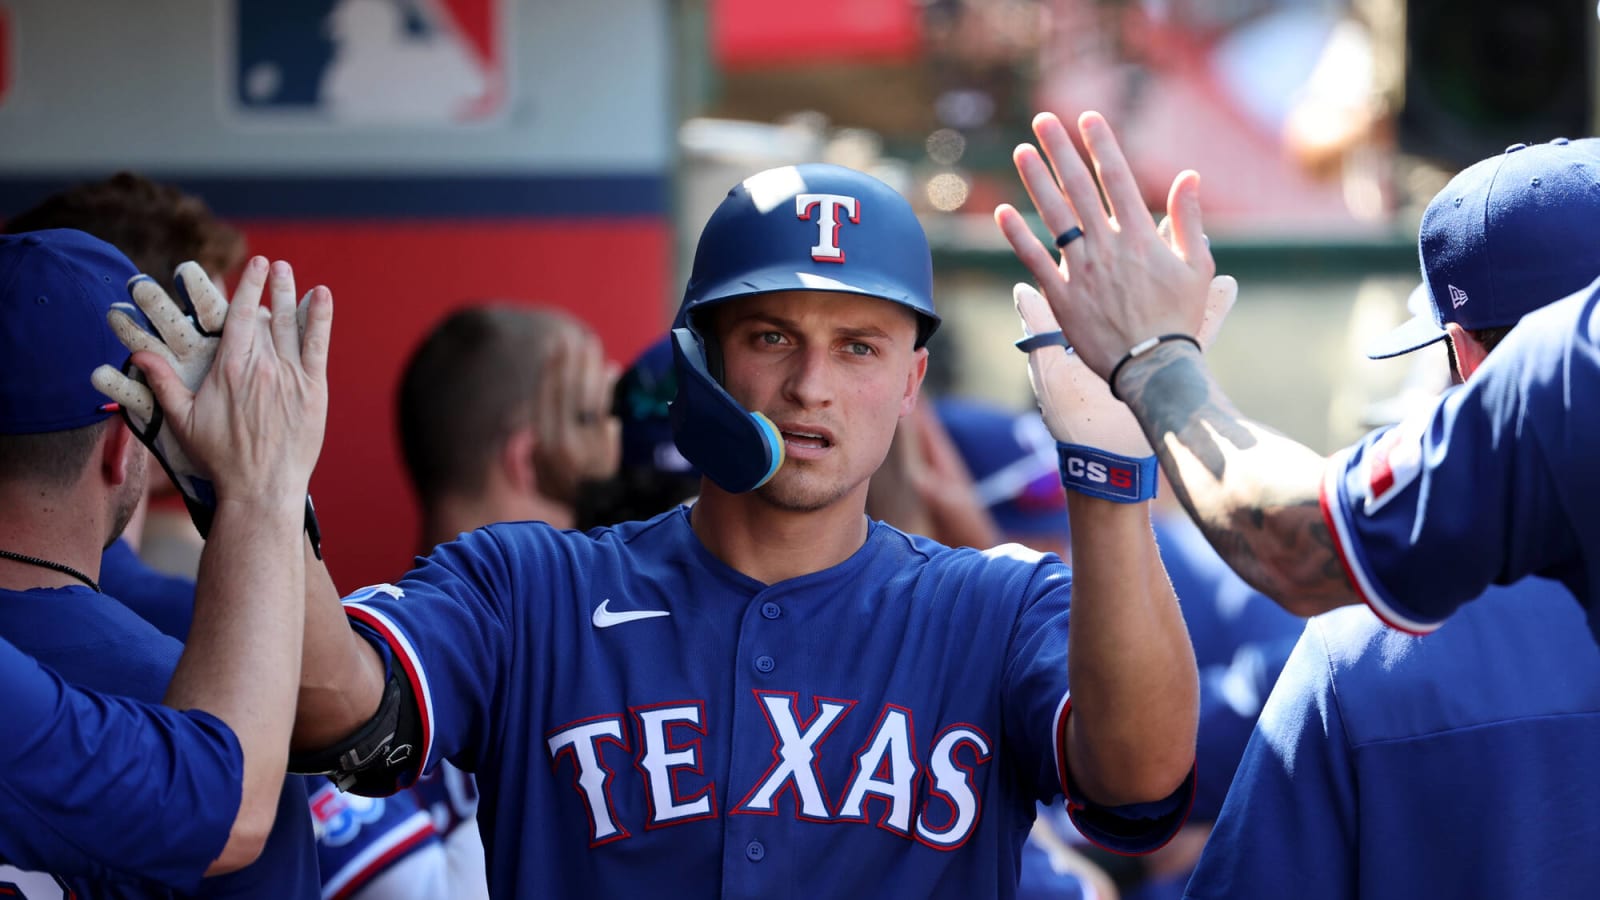 How Rangers Players like Corey Seager, Mitch Garver, and Brock Burke will adjust to Rule Changes